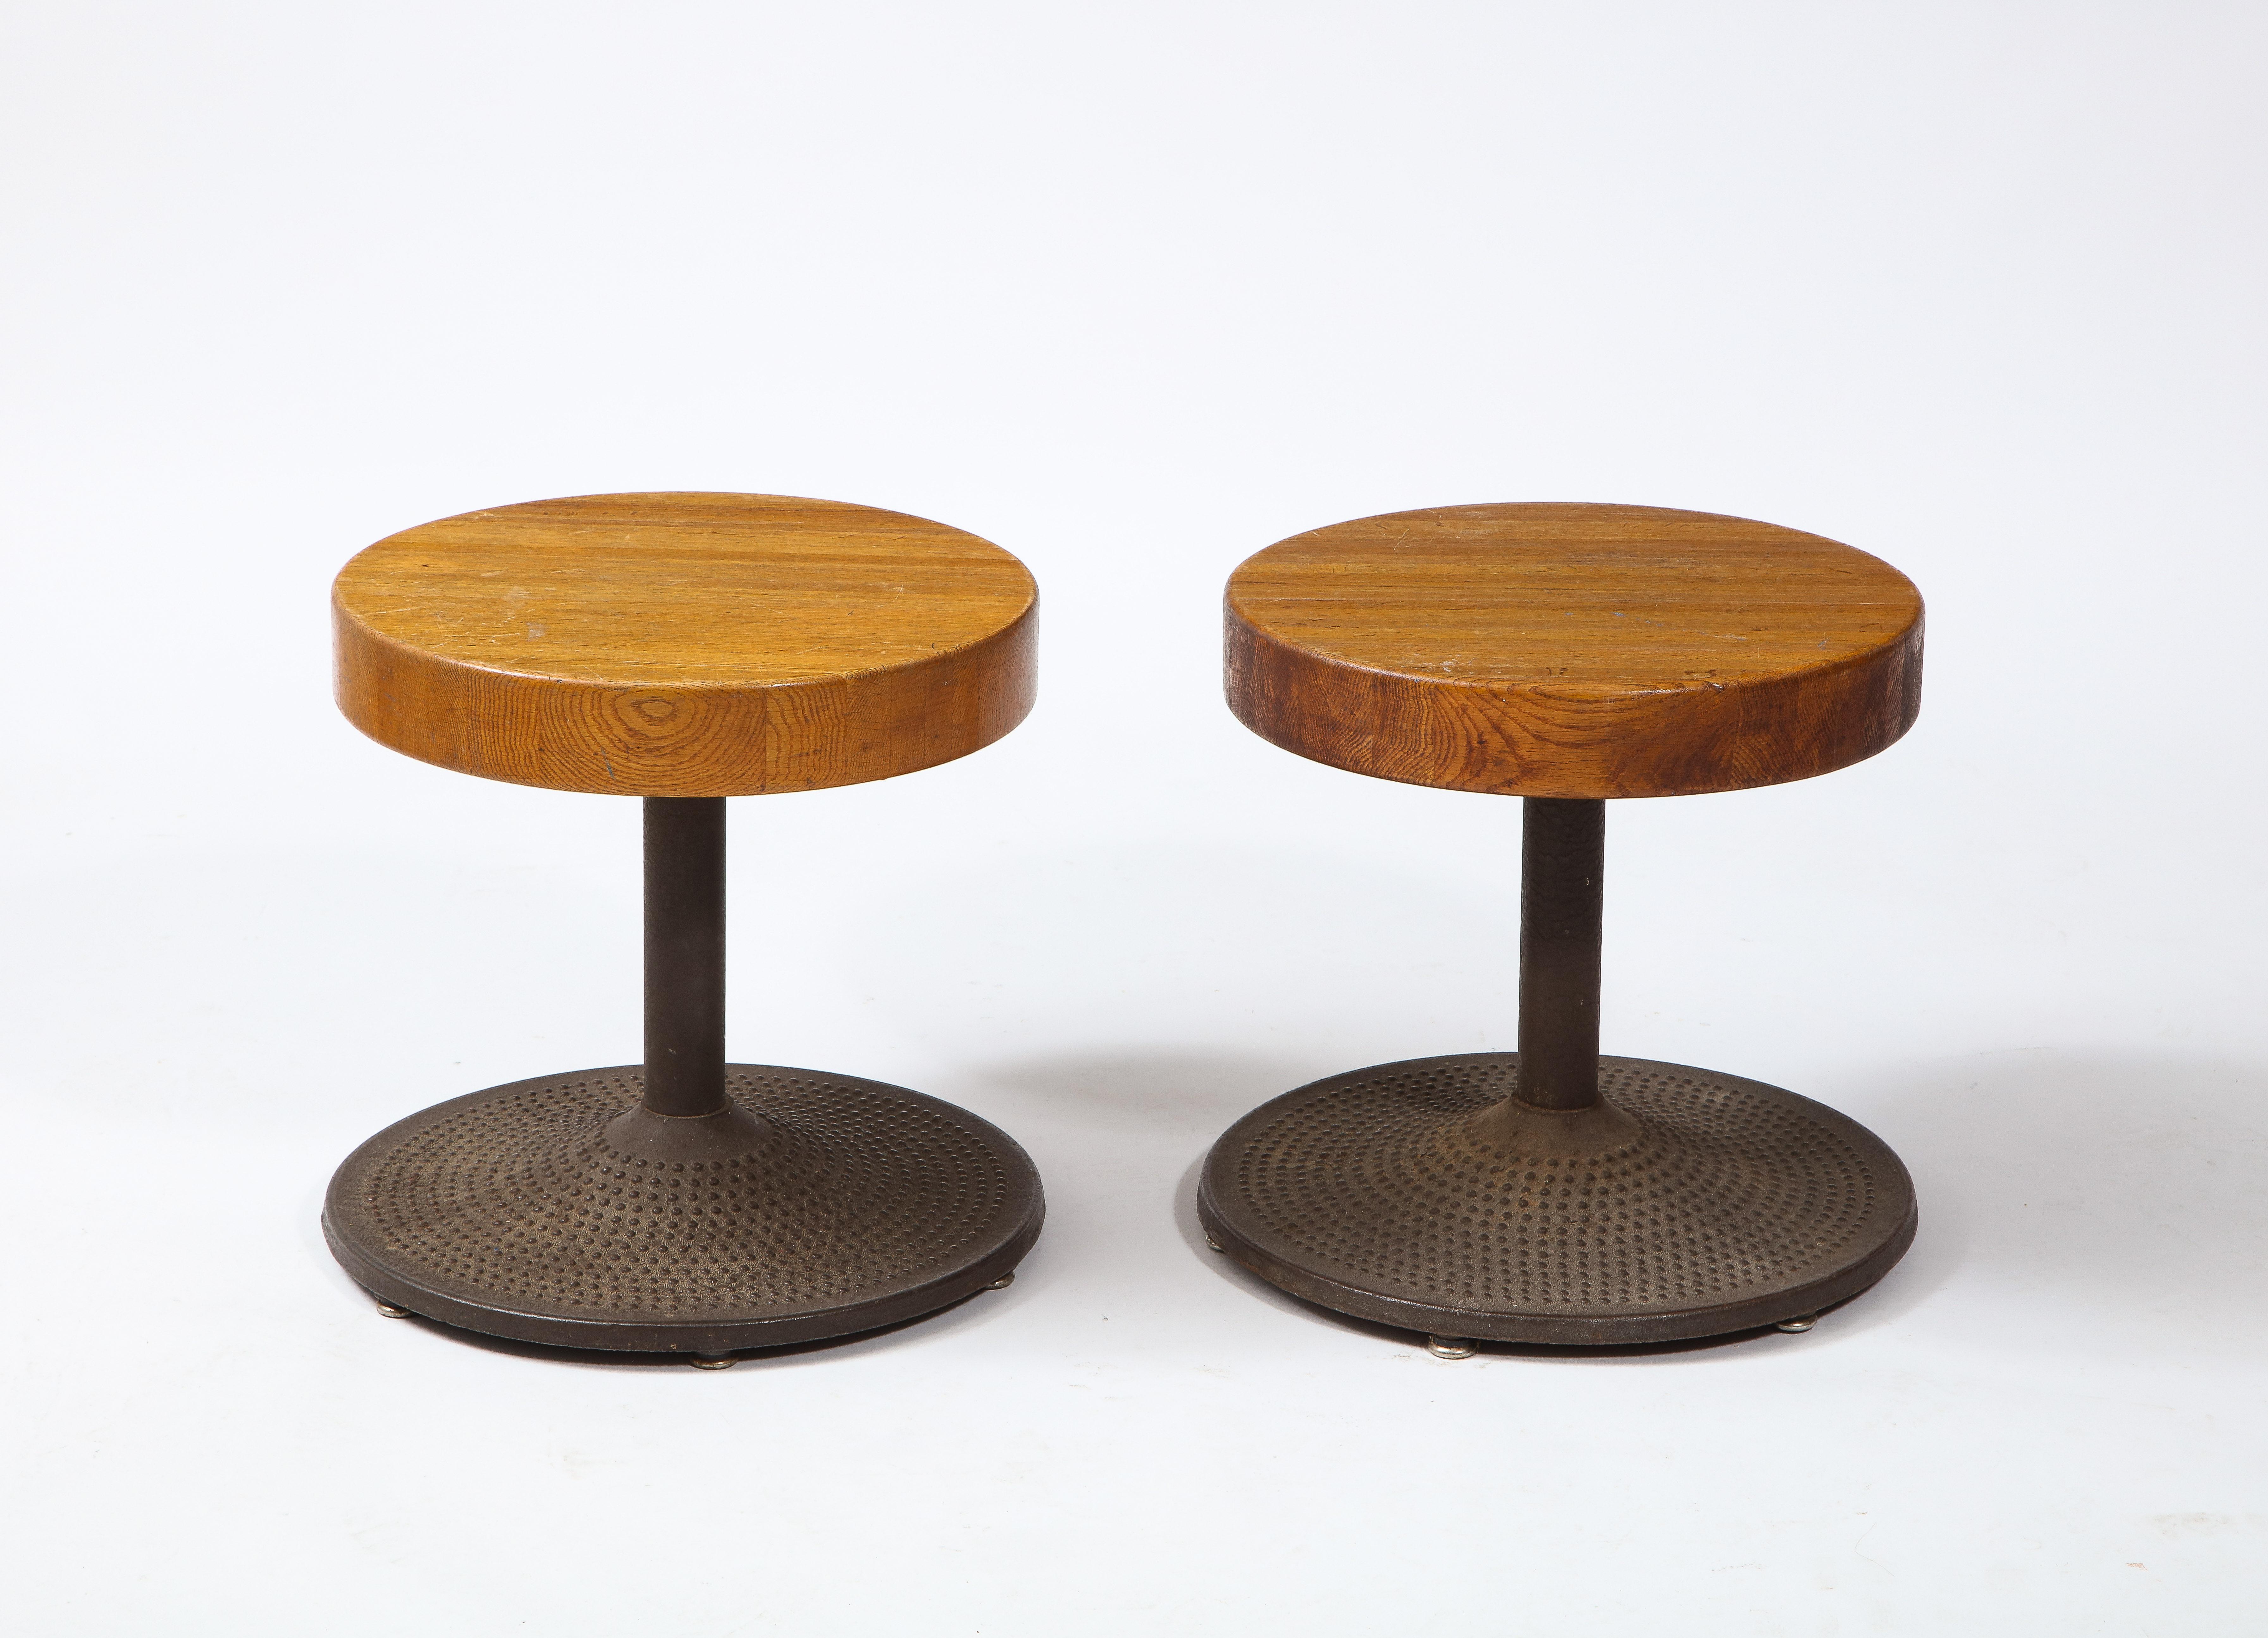 Fantastic pair of cast iron and oak stools, the bases are solid iron with a dimpled motif while the top are solid oak, the design bears similarity to a Perriand model for Les Arcs.